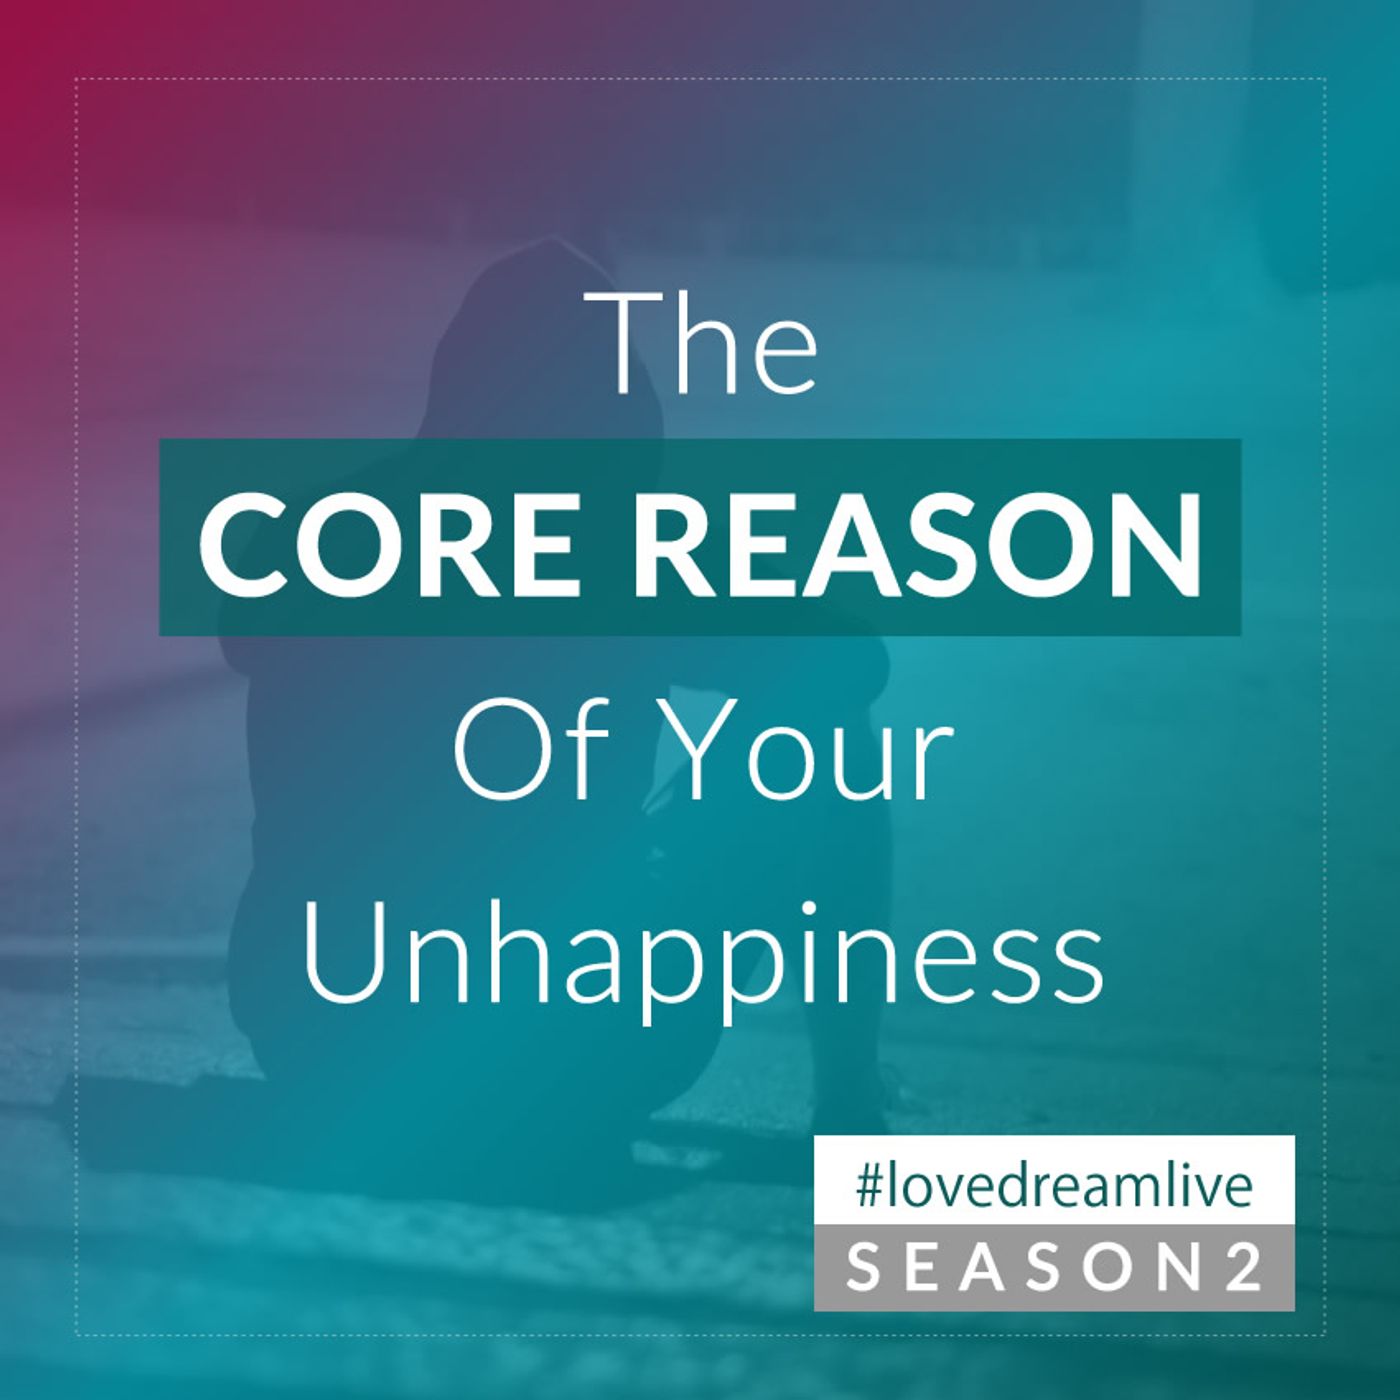 The Core Reason Of Your Unhappiness